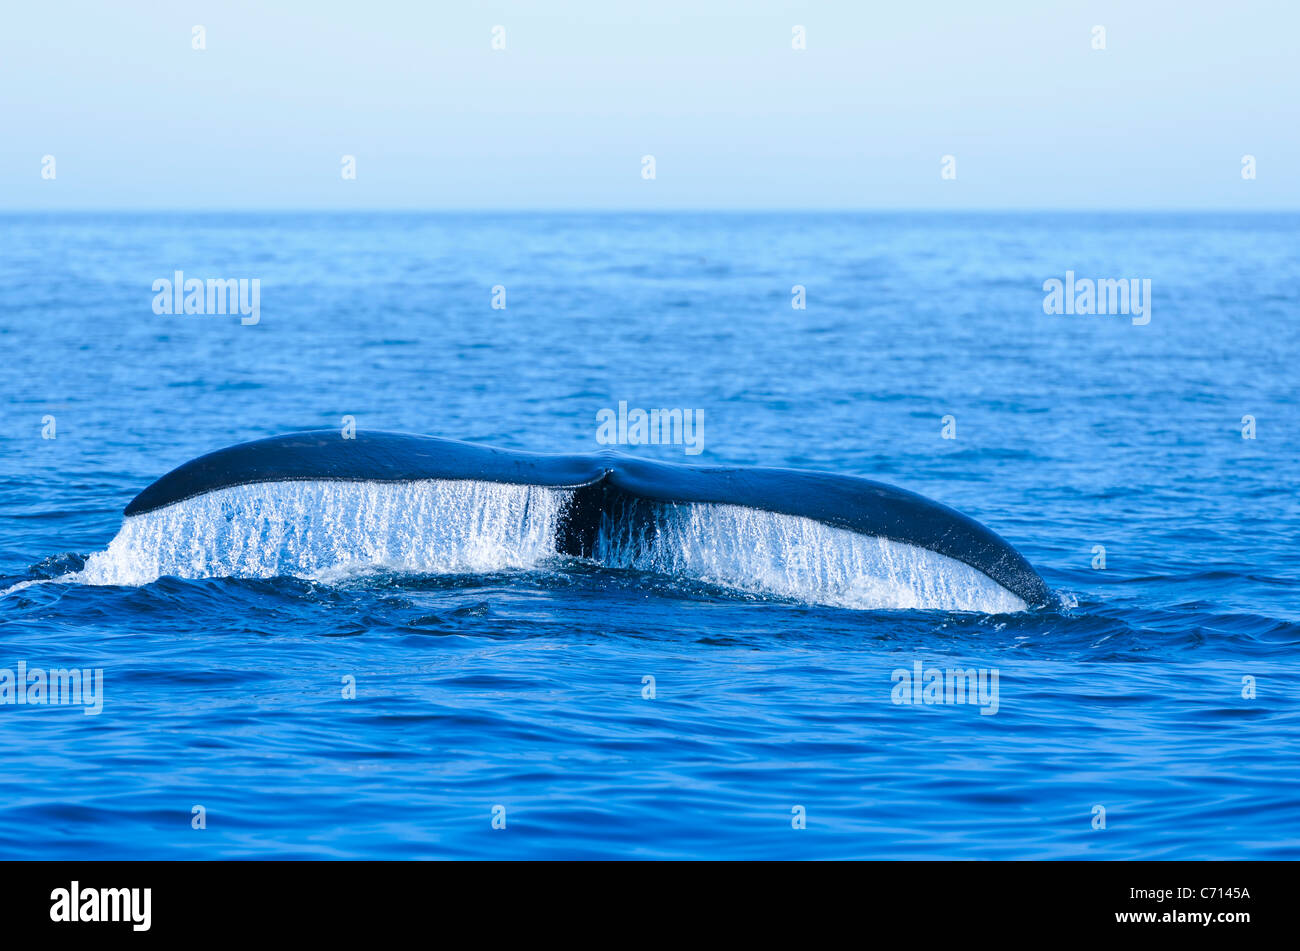 North Atlantic Right Whale (Eubalaena glacialis) in the Bay of